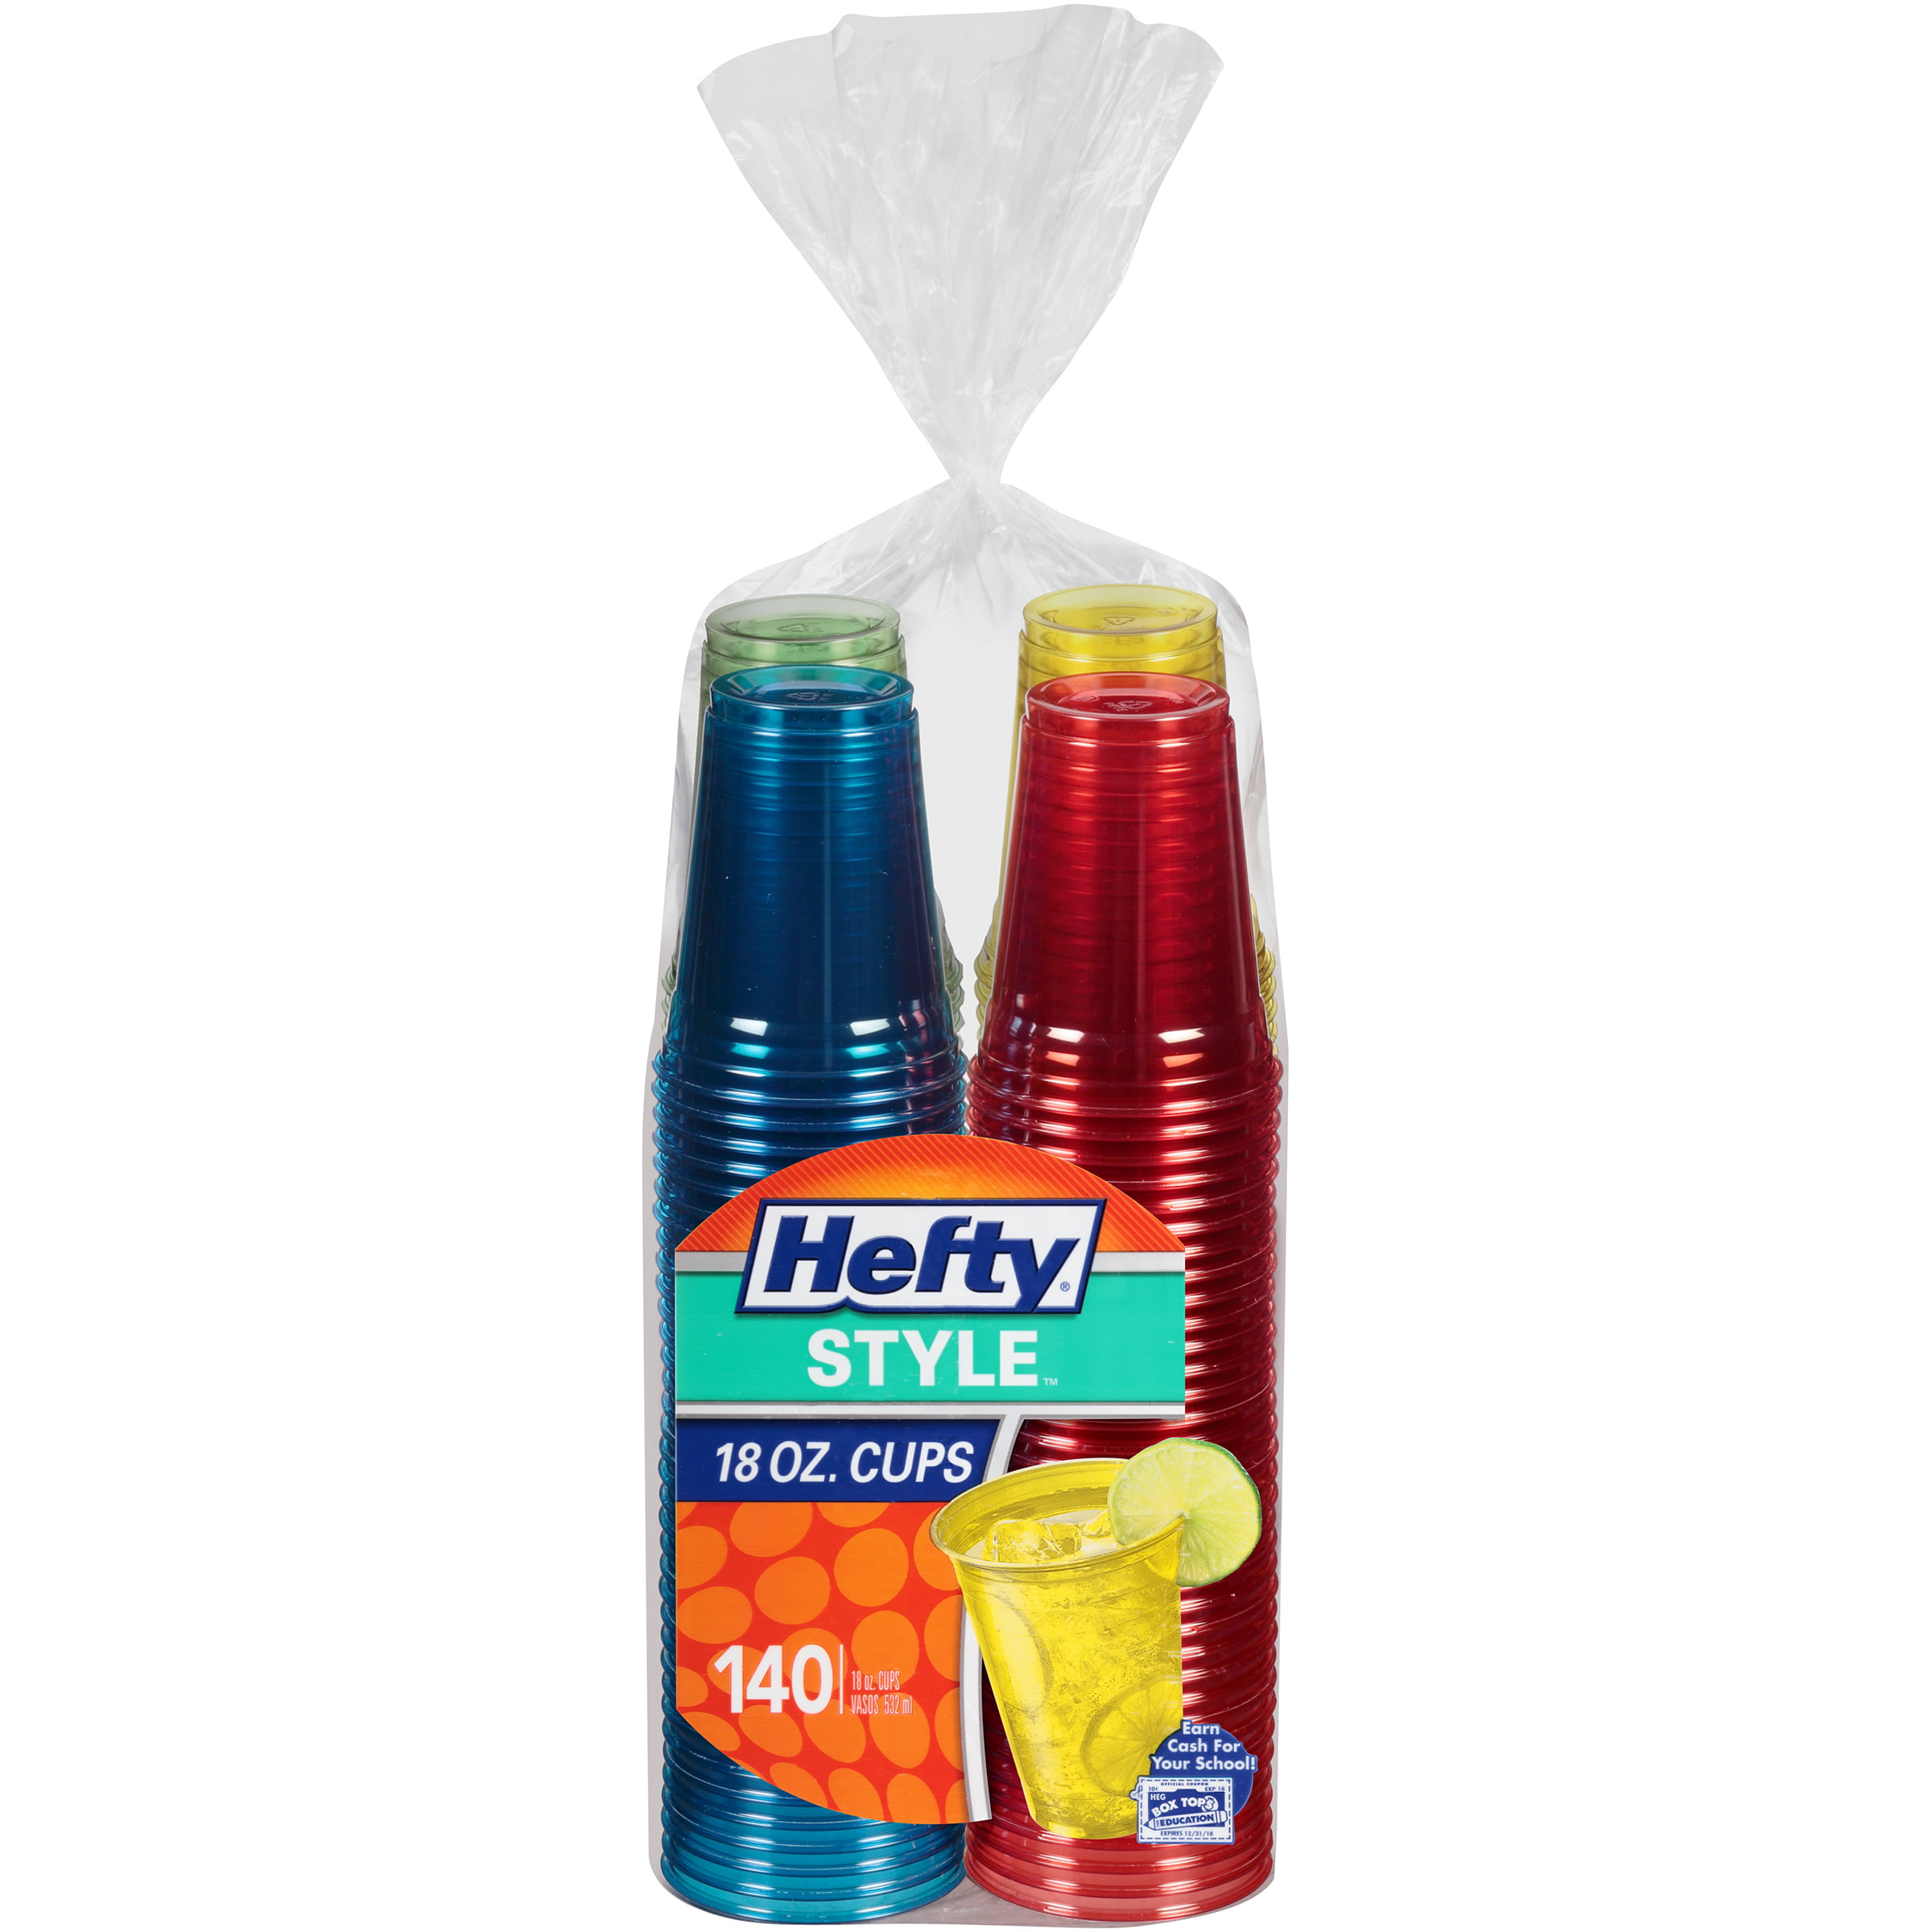 Hefty Party On Blue Plastic Cups - 18 oz - 120 Count - Easy-Grip Design